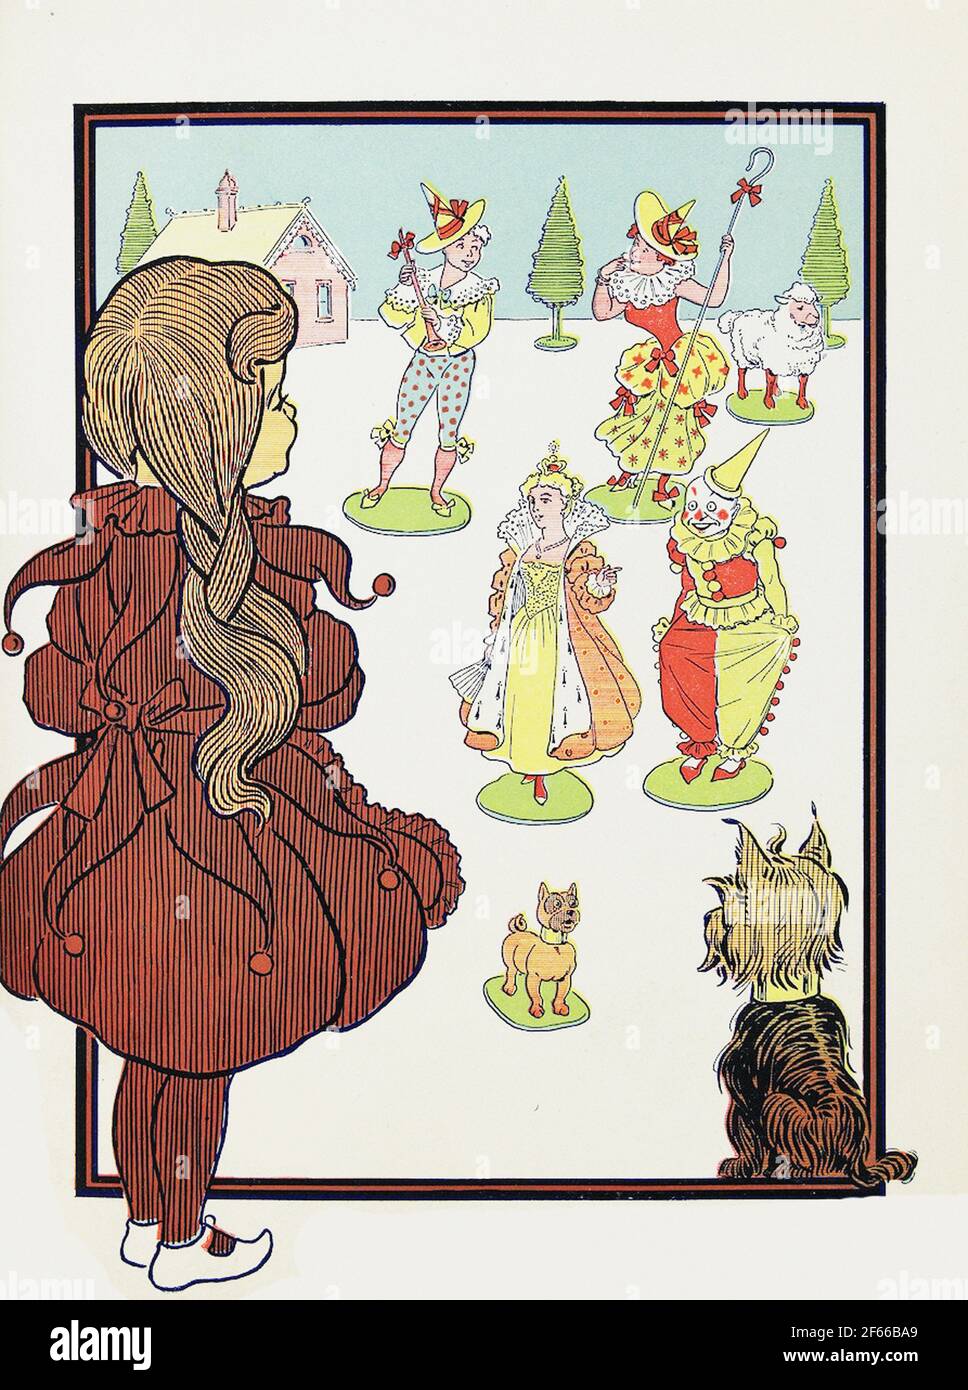 the wizard of oz book illustrations